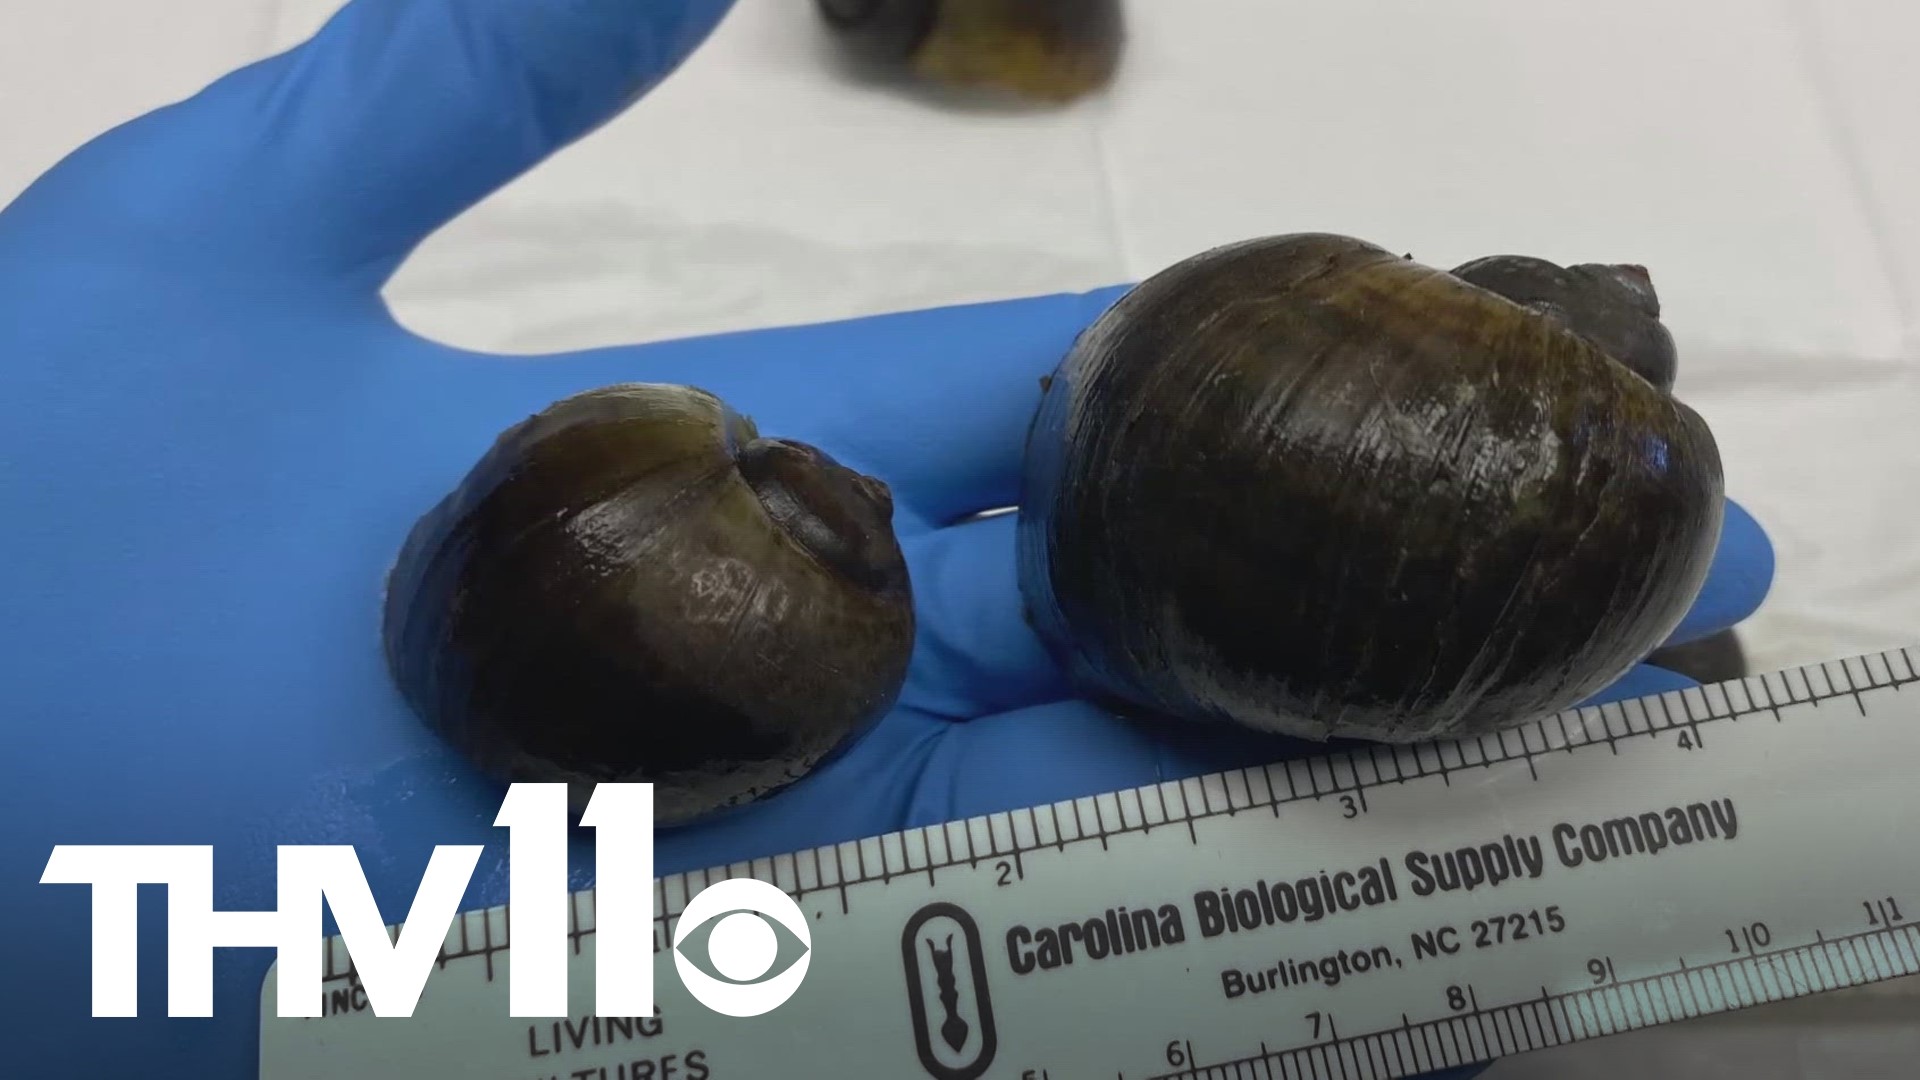 The Arkansas Game and Fish Commission is warning the public to be on the lookout for an invasive snail species. Here’s how to spot and report them.